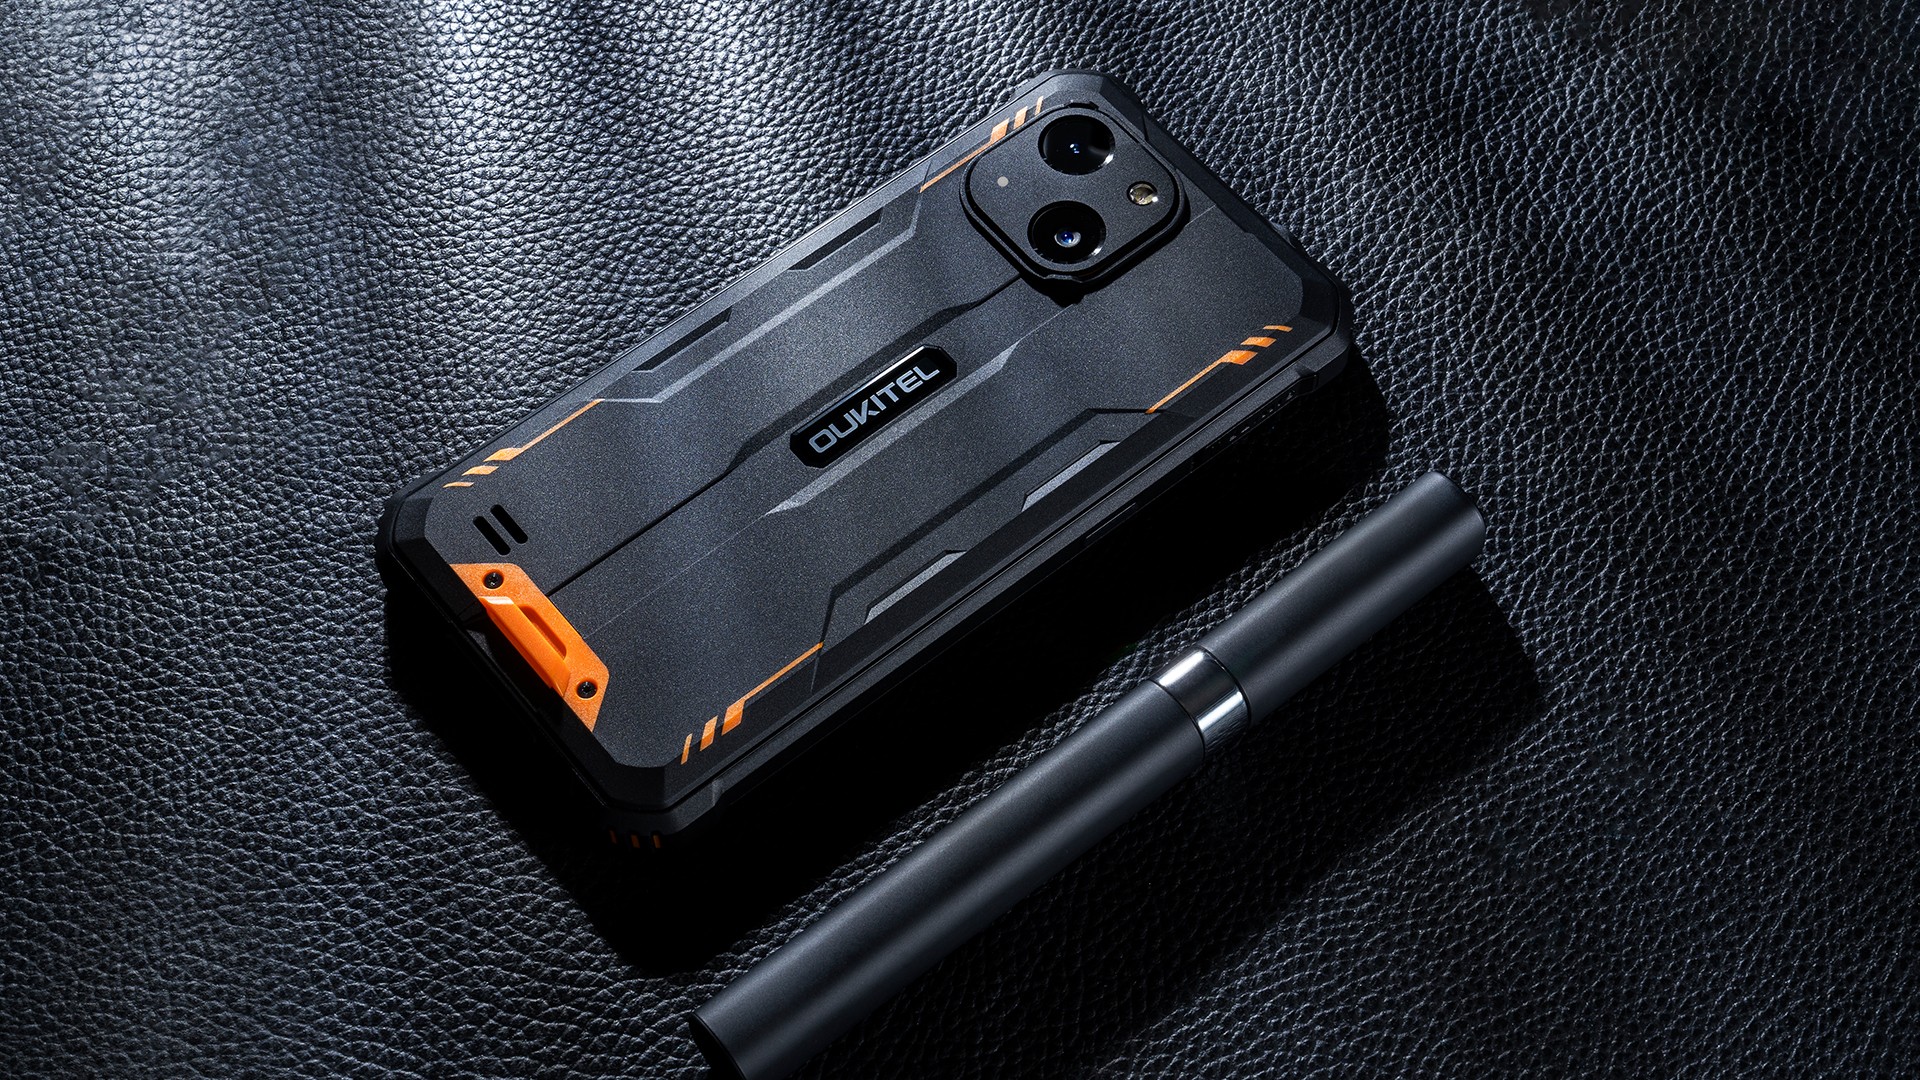 Oukitel WP32: Sleek and Lightweight, the Rugged Phone for